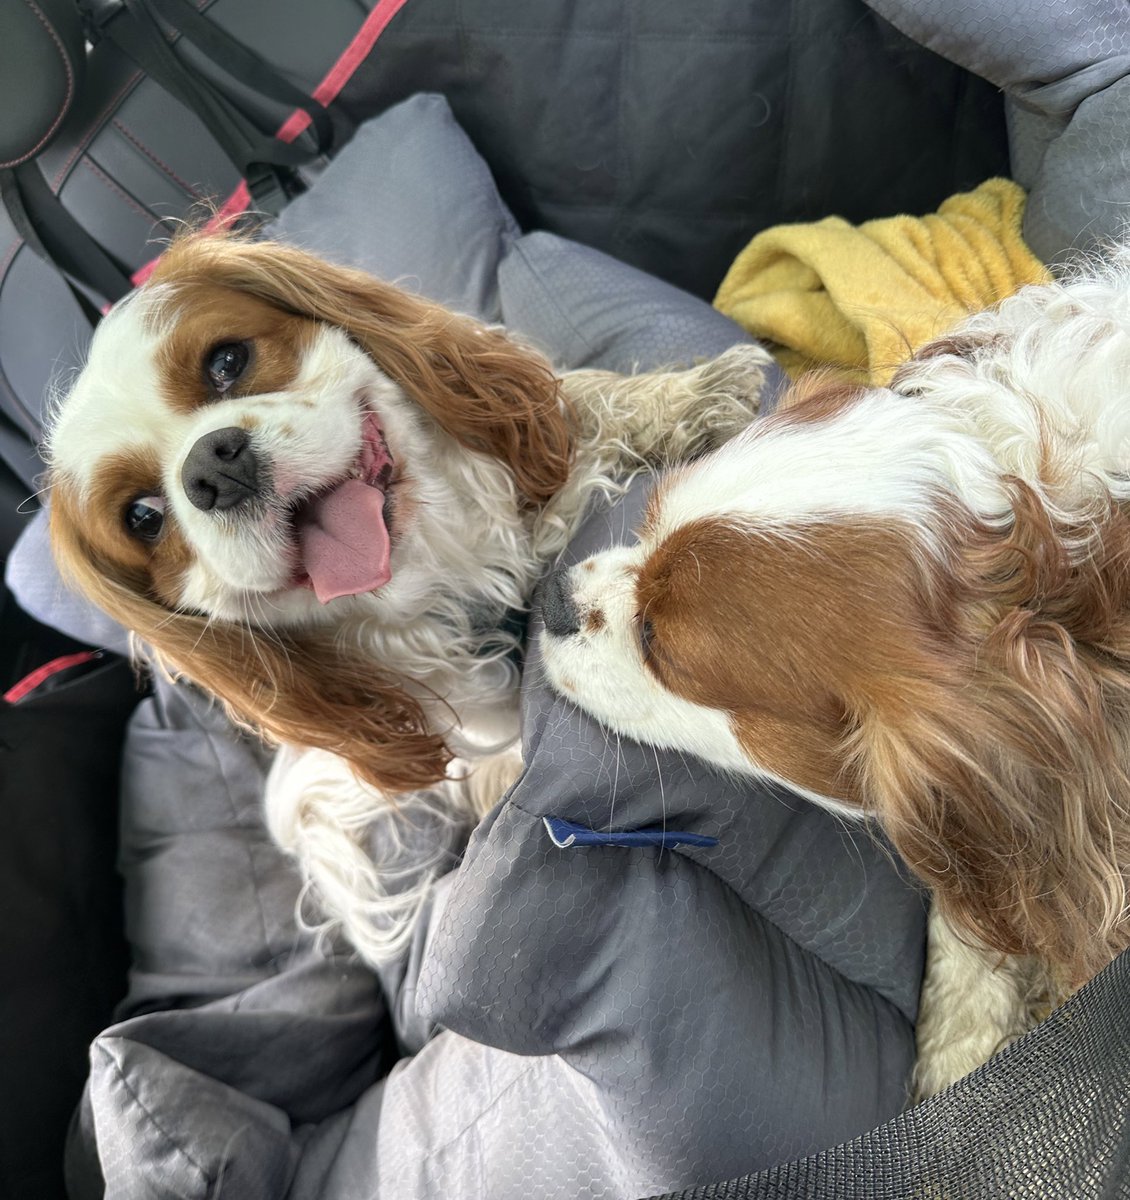 It’s been a while since we posted a #tongueouttuesday 👅 but this post walkies one makes Mum smile. Alfie thinks his car seat is to far from me so he likes to put his head on mine to be close 🐶🐶 #DogsofX #cavpack #brothers